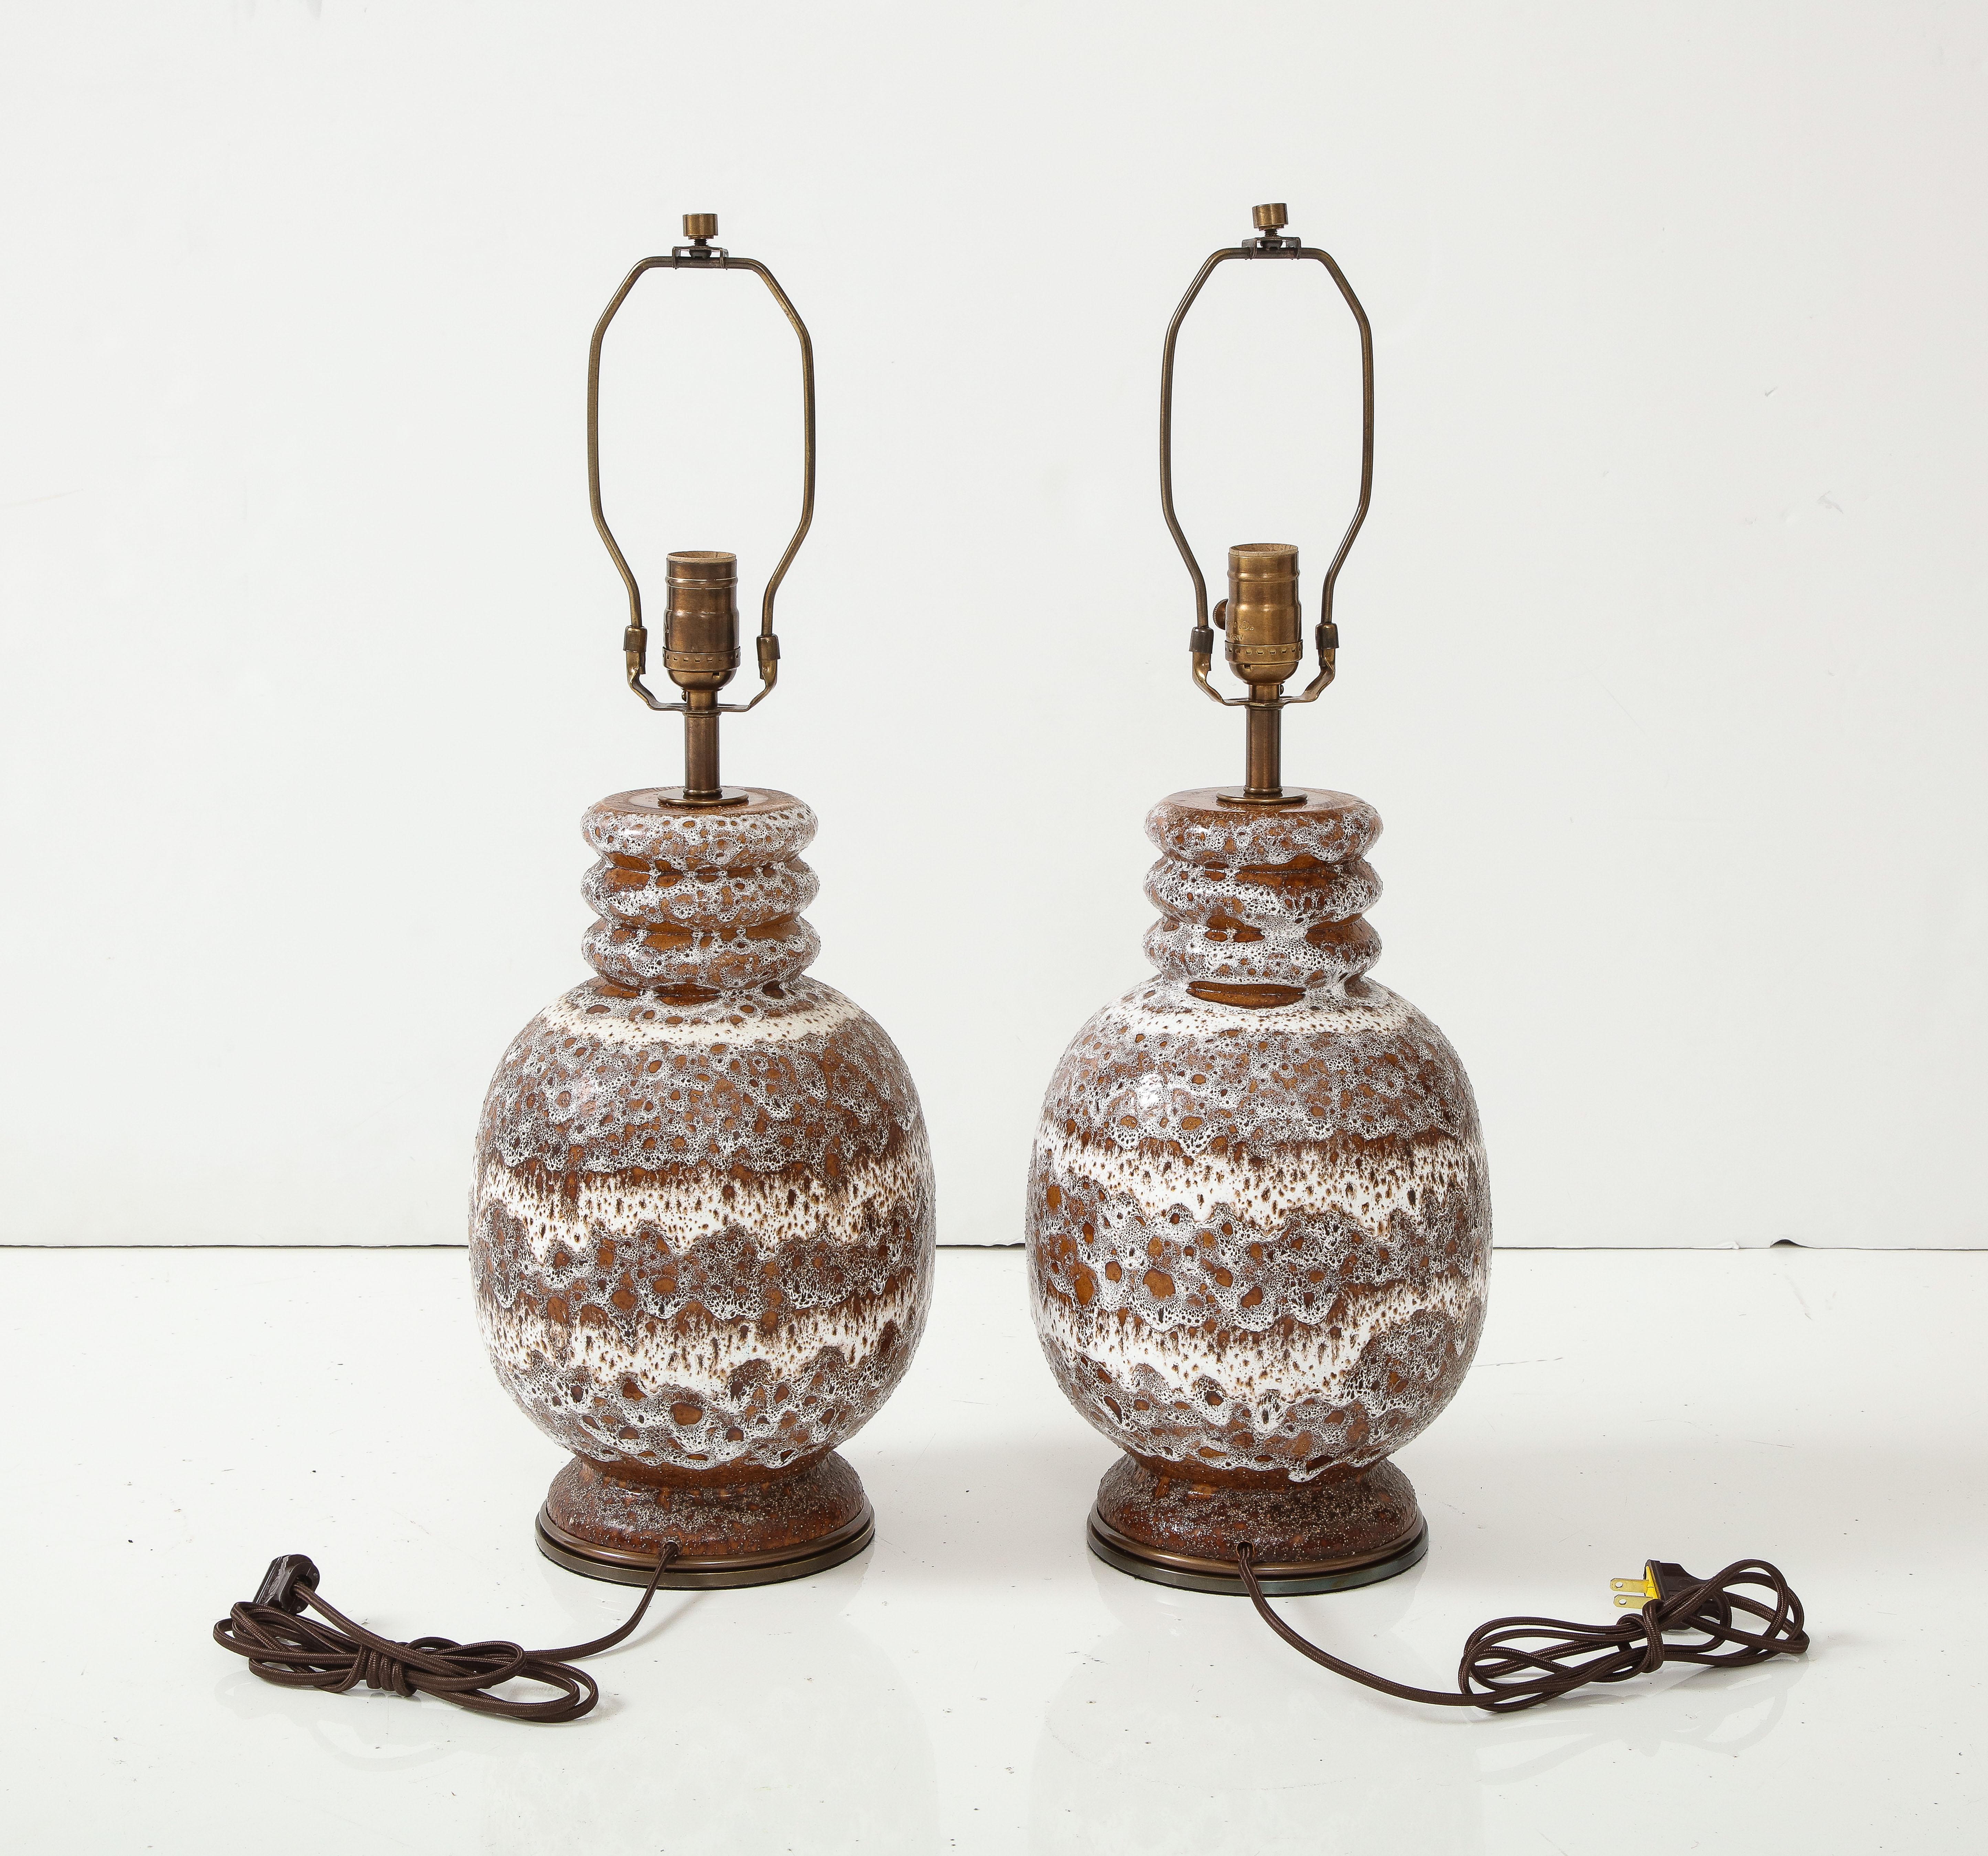 West German Froth Glazed Ceramic Lamps In Excellent Condition For Sale In New York, NY